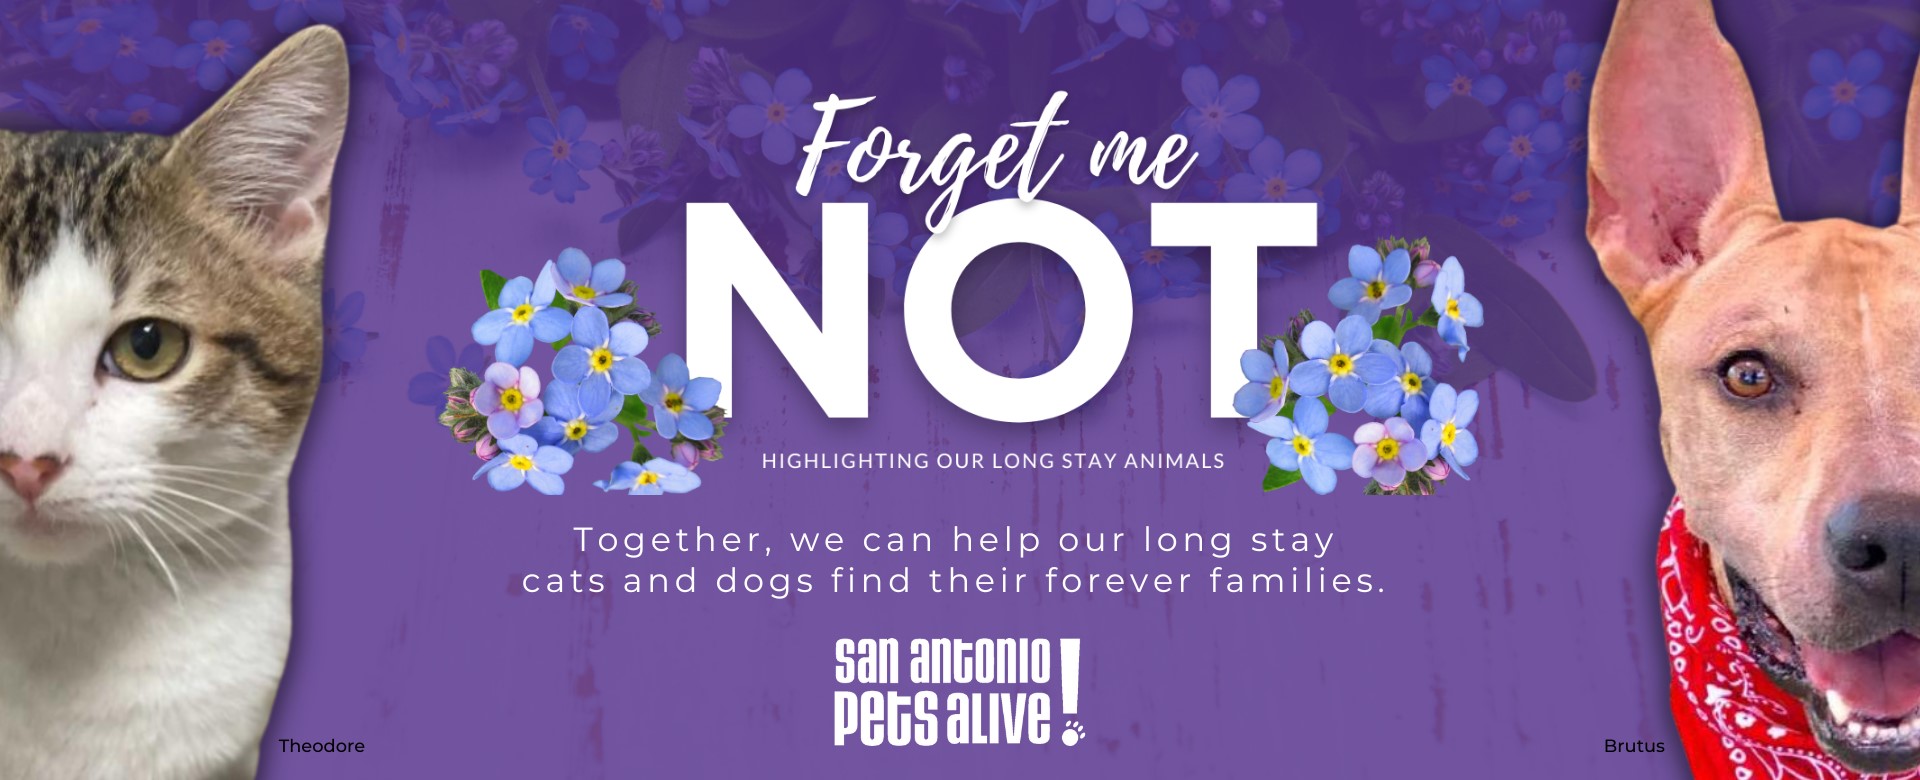 Forget Me Not - Together, we can help our long-stay cats and dogs find their forever families.